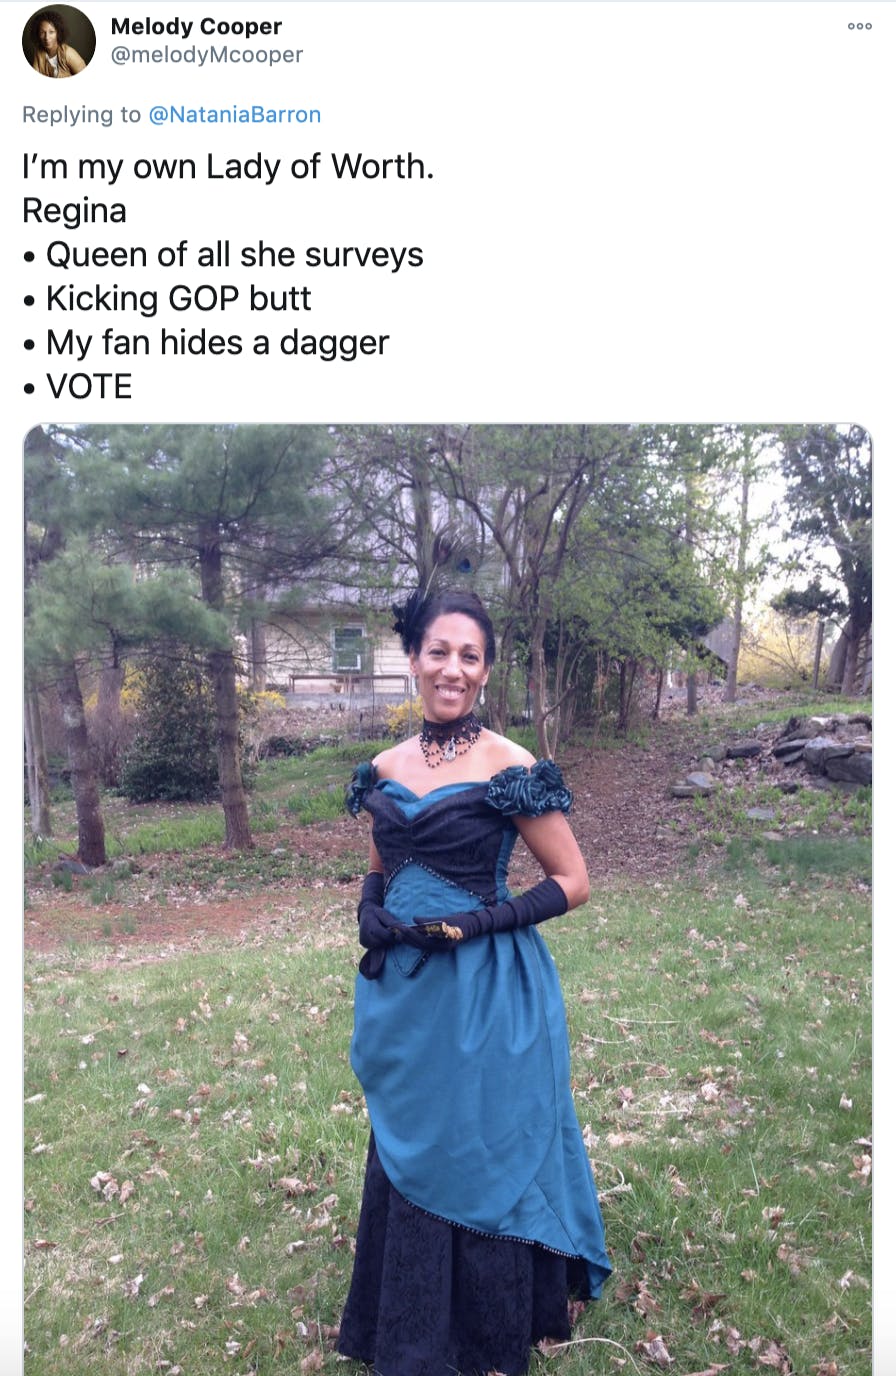 'I’m my own Lady of Worth. Regina • Queen of all she surveys • Kicking GOP butt • My fan hides a dagger • VOTE' picture of a Black woman with her hair pinned up, wearing a blue and black historic evening gown